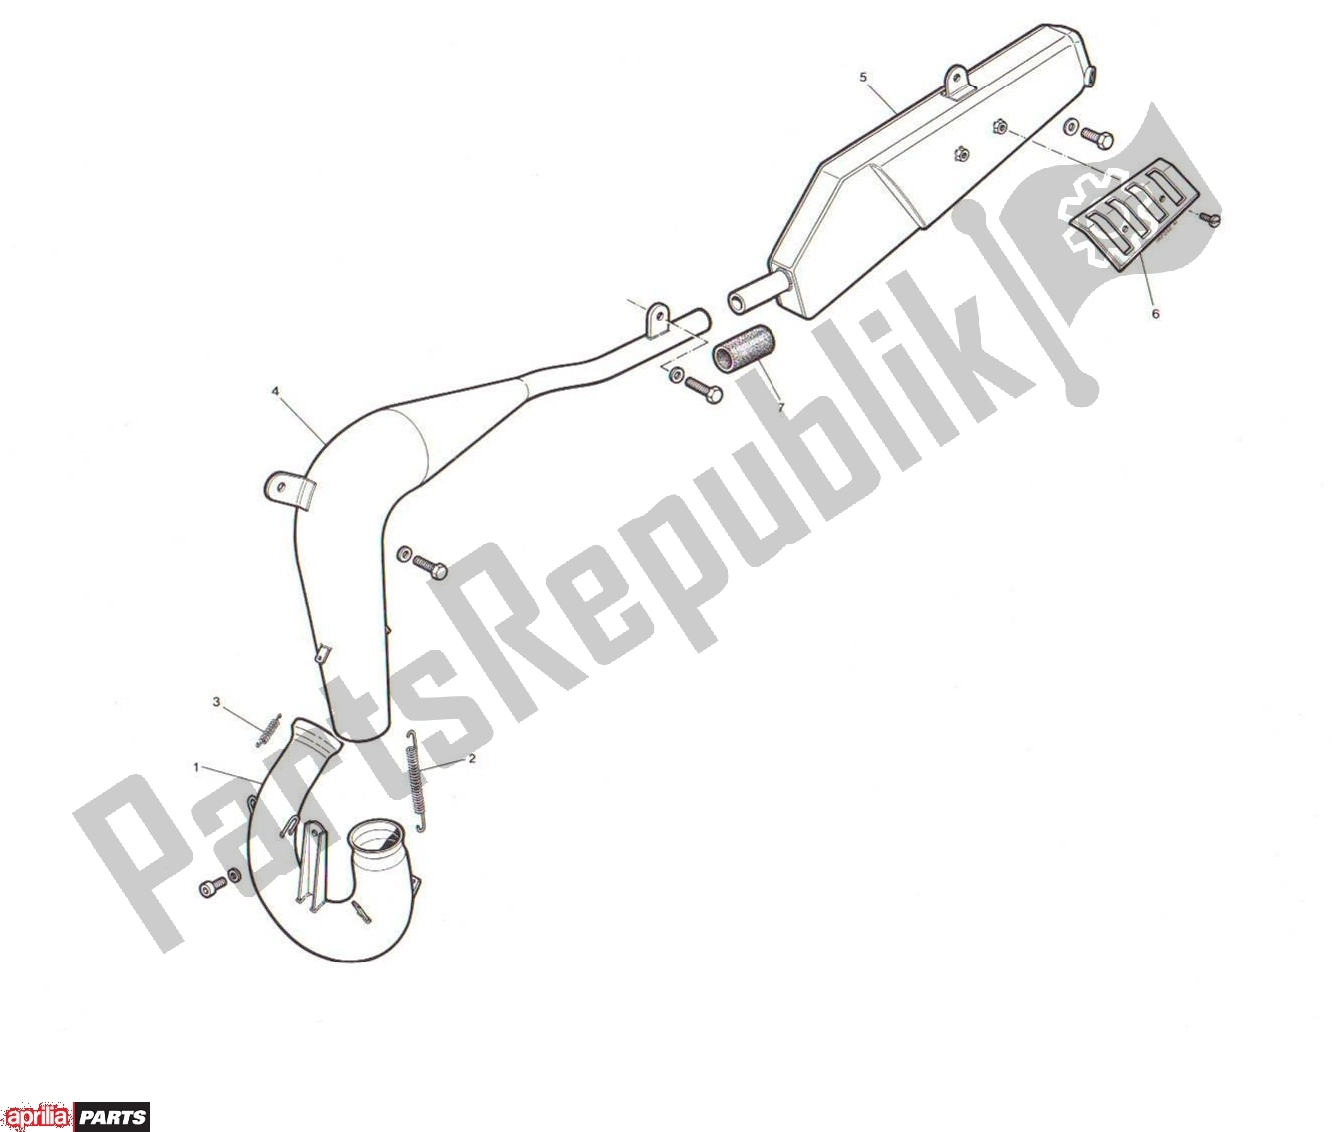 All parts for the Exhaust of the Aprilia ETX 84 125 1980 - 1995